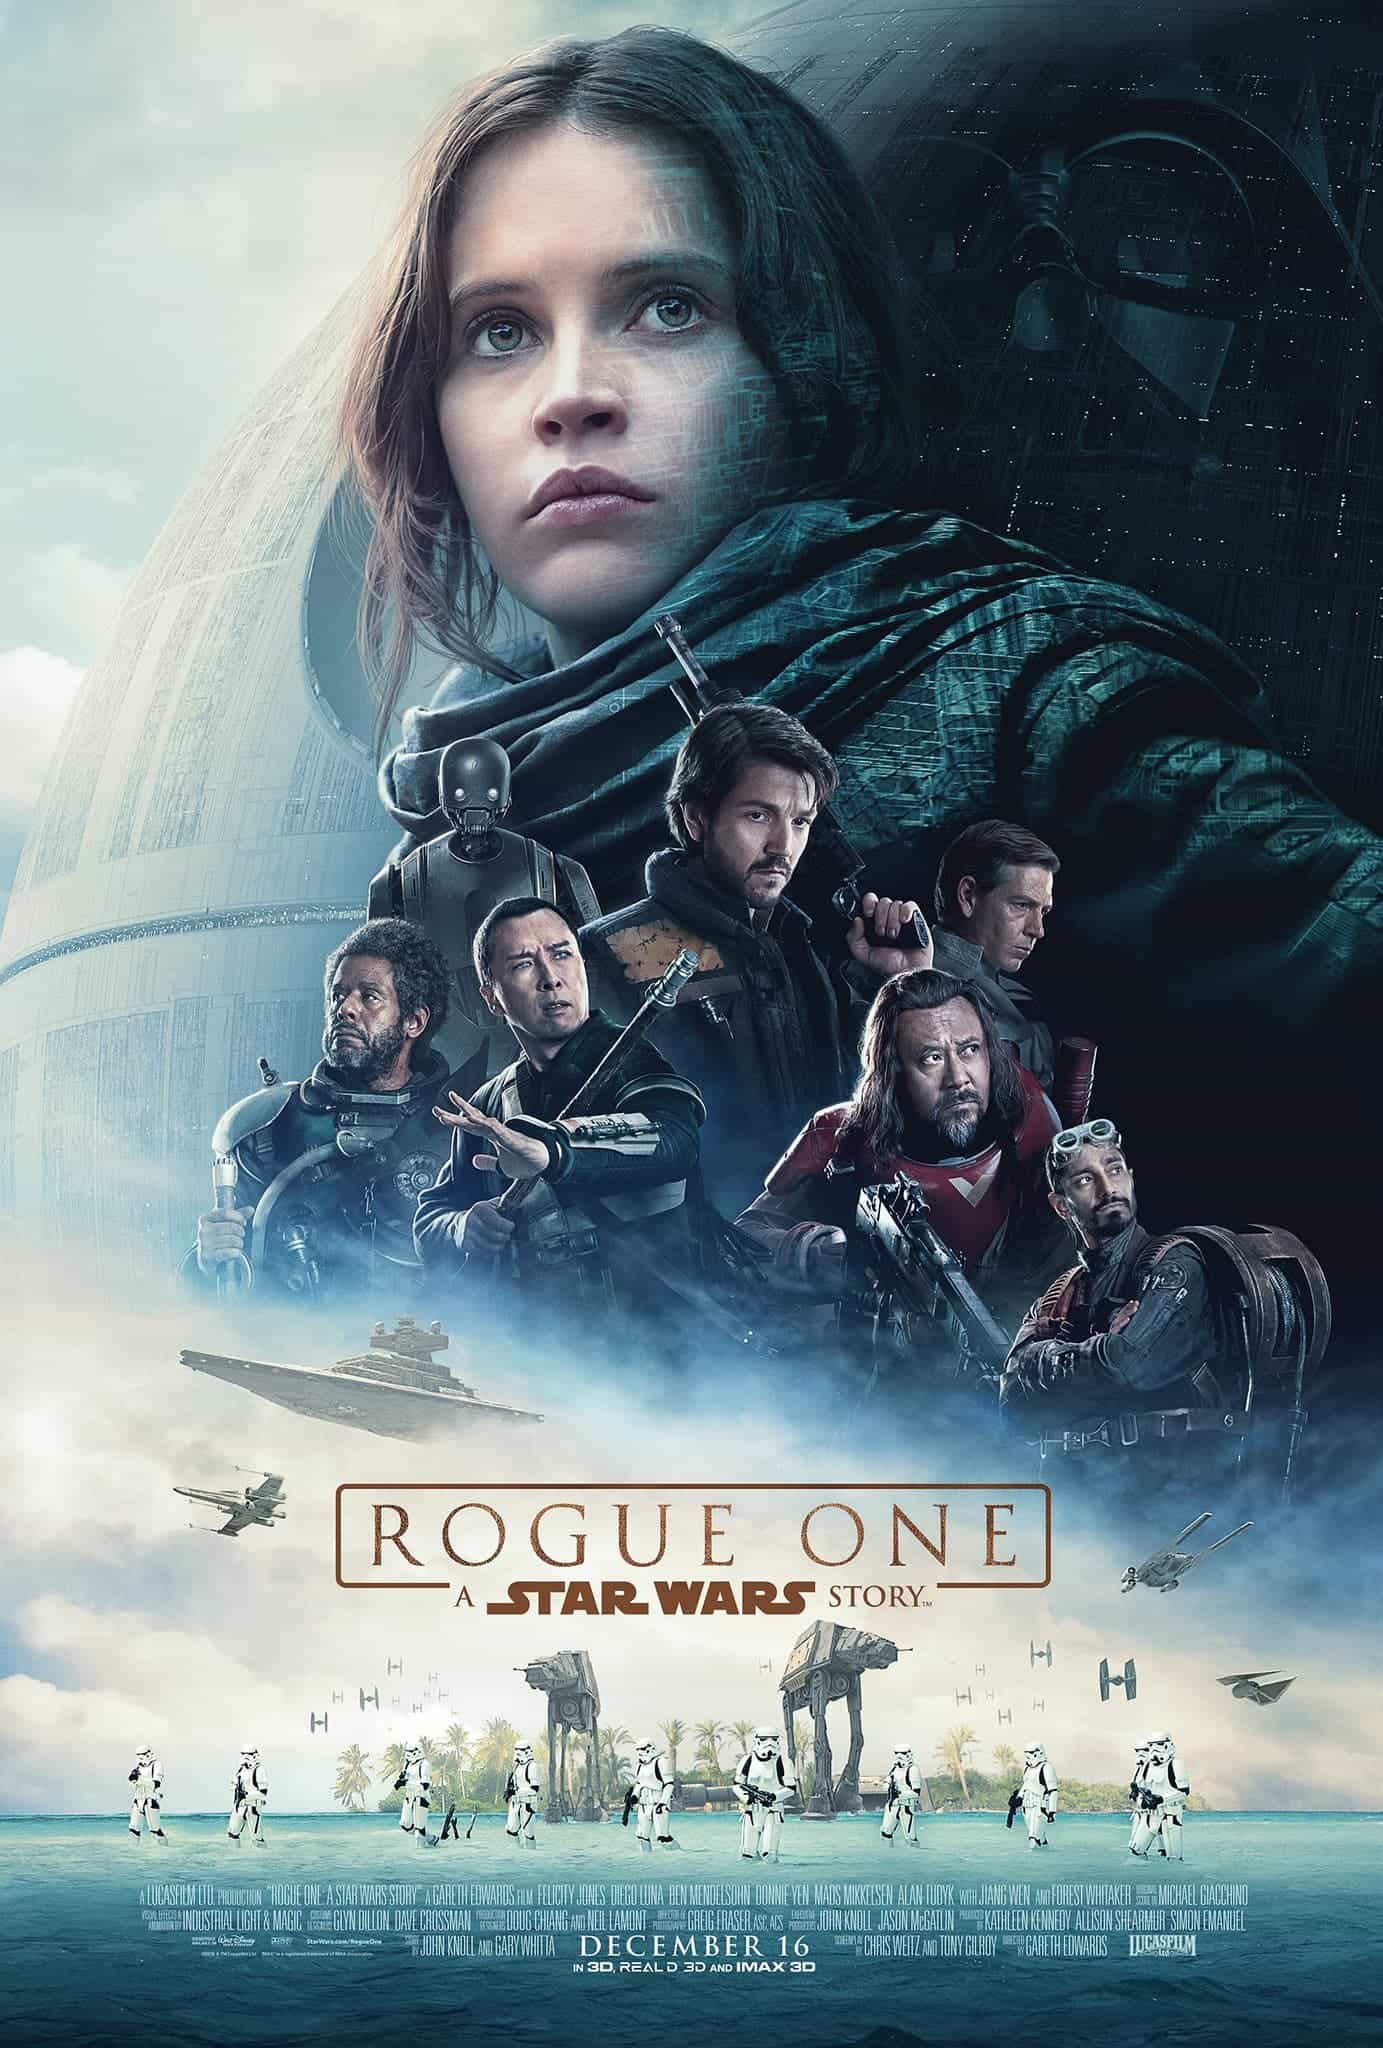 World Box Office Weekending 18th December 2016:  Who else but Rogue One dominates this week